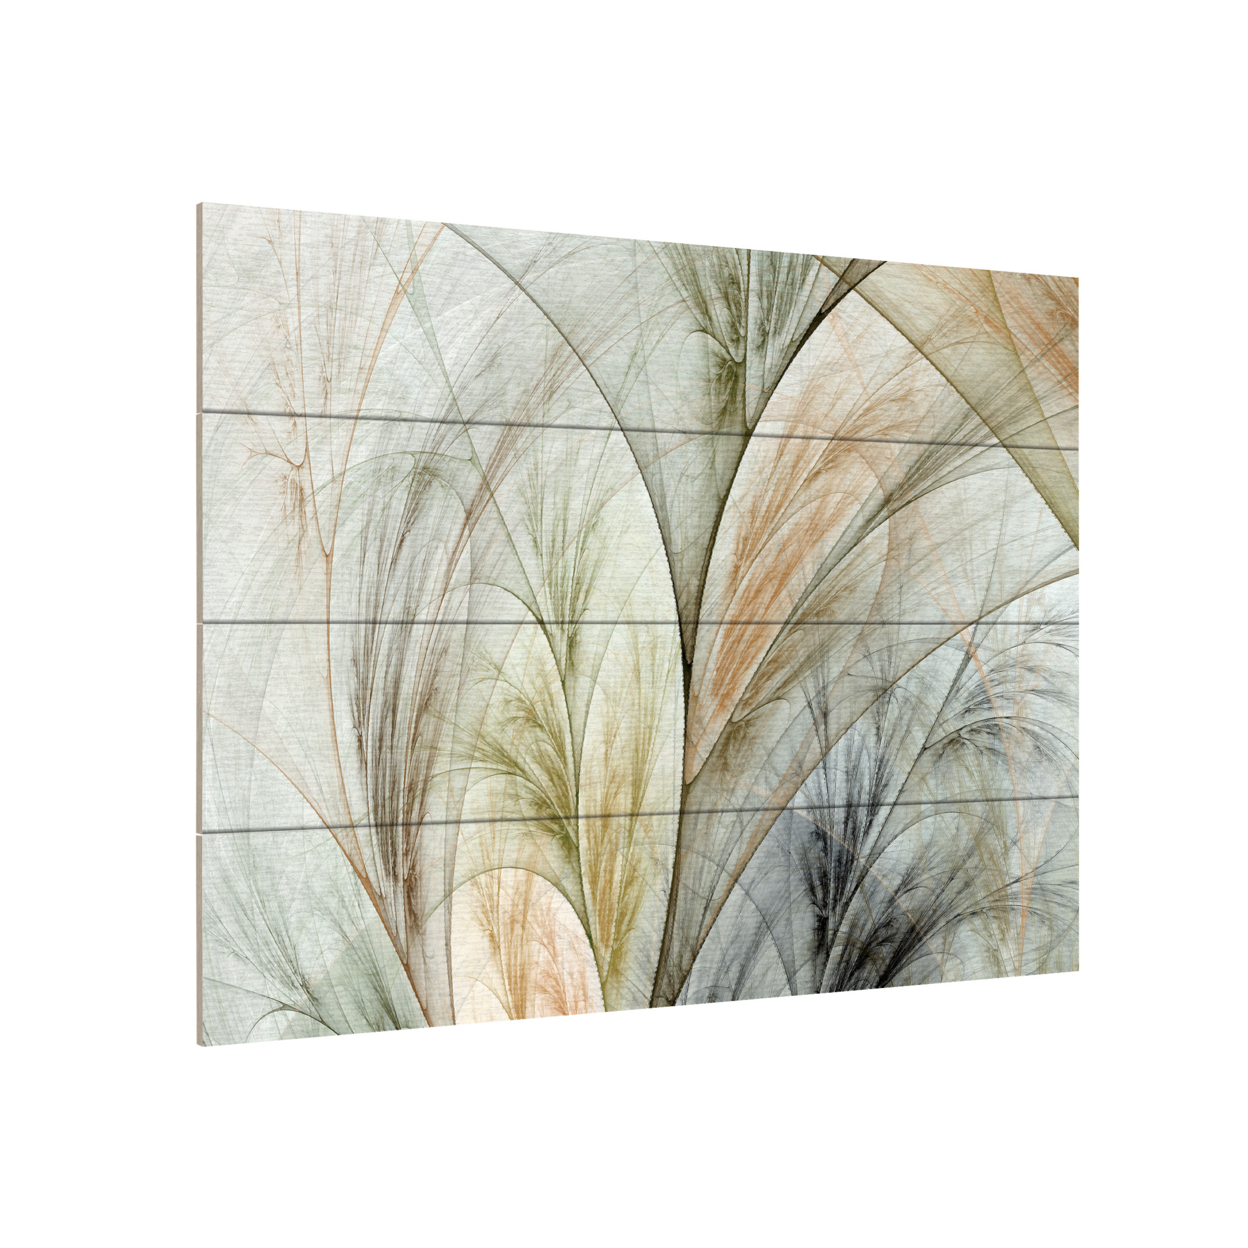 Wall Art 12 X 16 Inches Titled Fractal Grass V Ready To Hang Printed On Wooden Planks